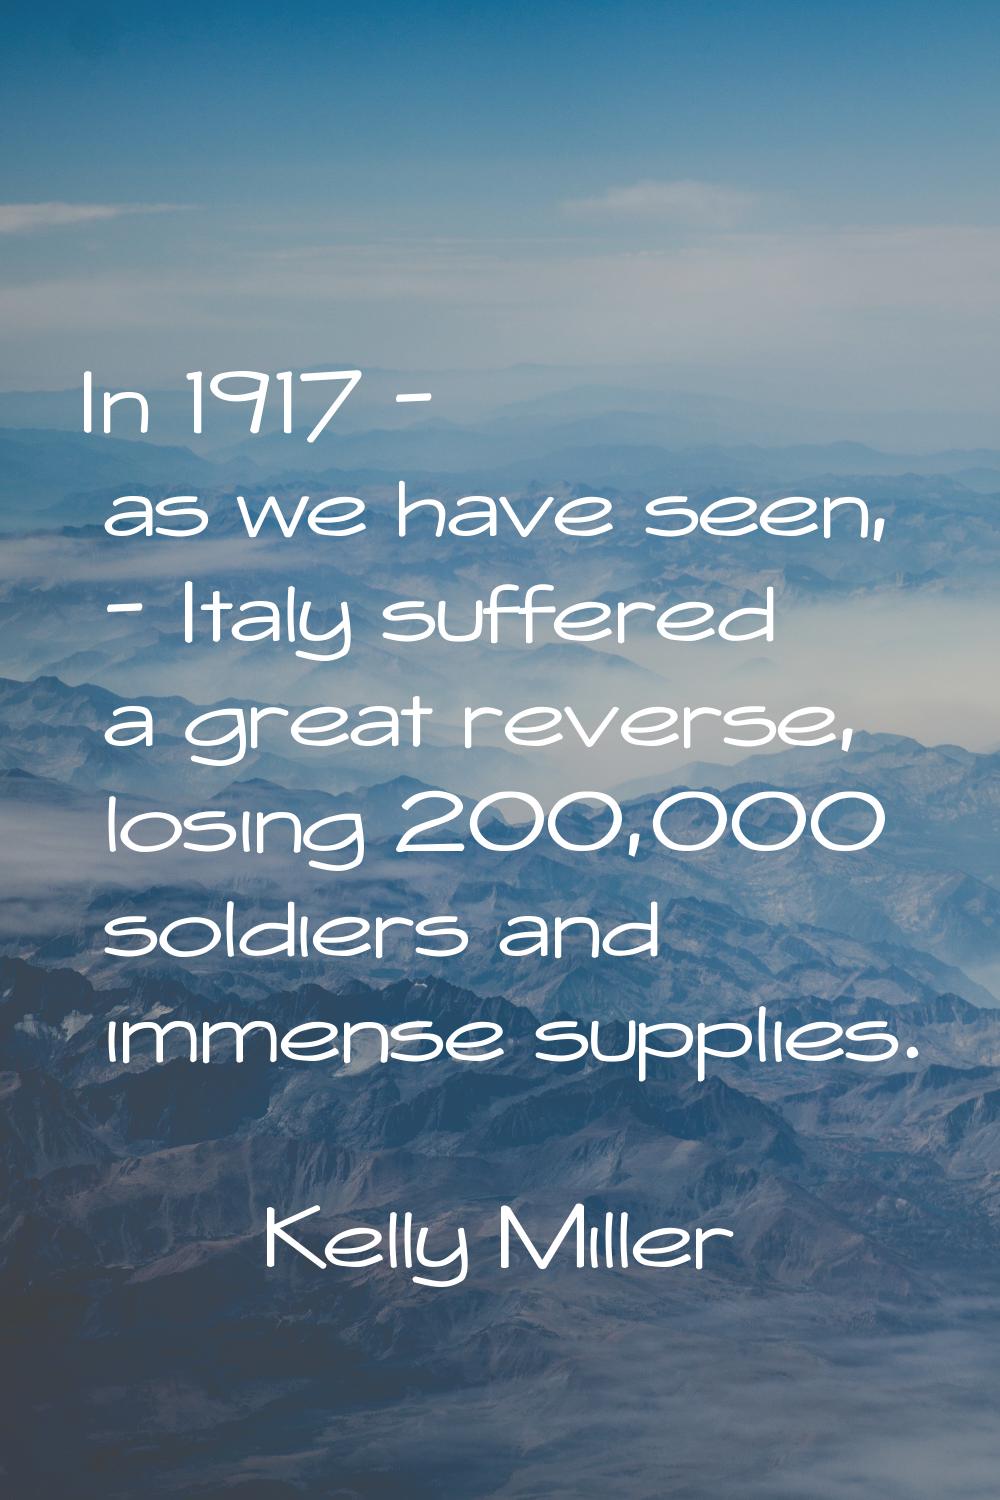 In 1917 - as we have seen, - Italy suffered a great reverse, losing 200,000 soldiers and immense su